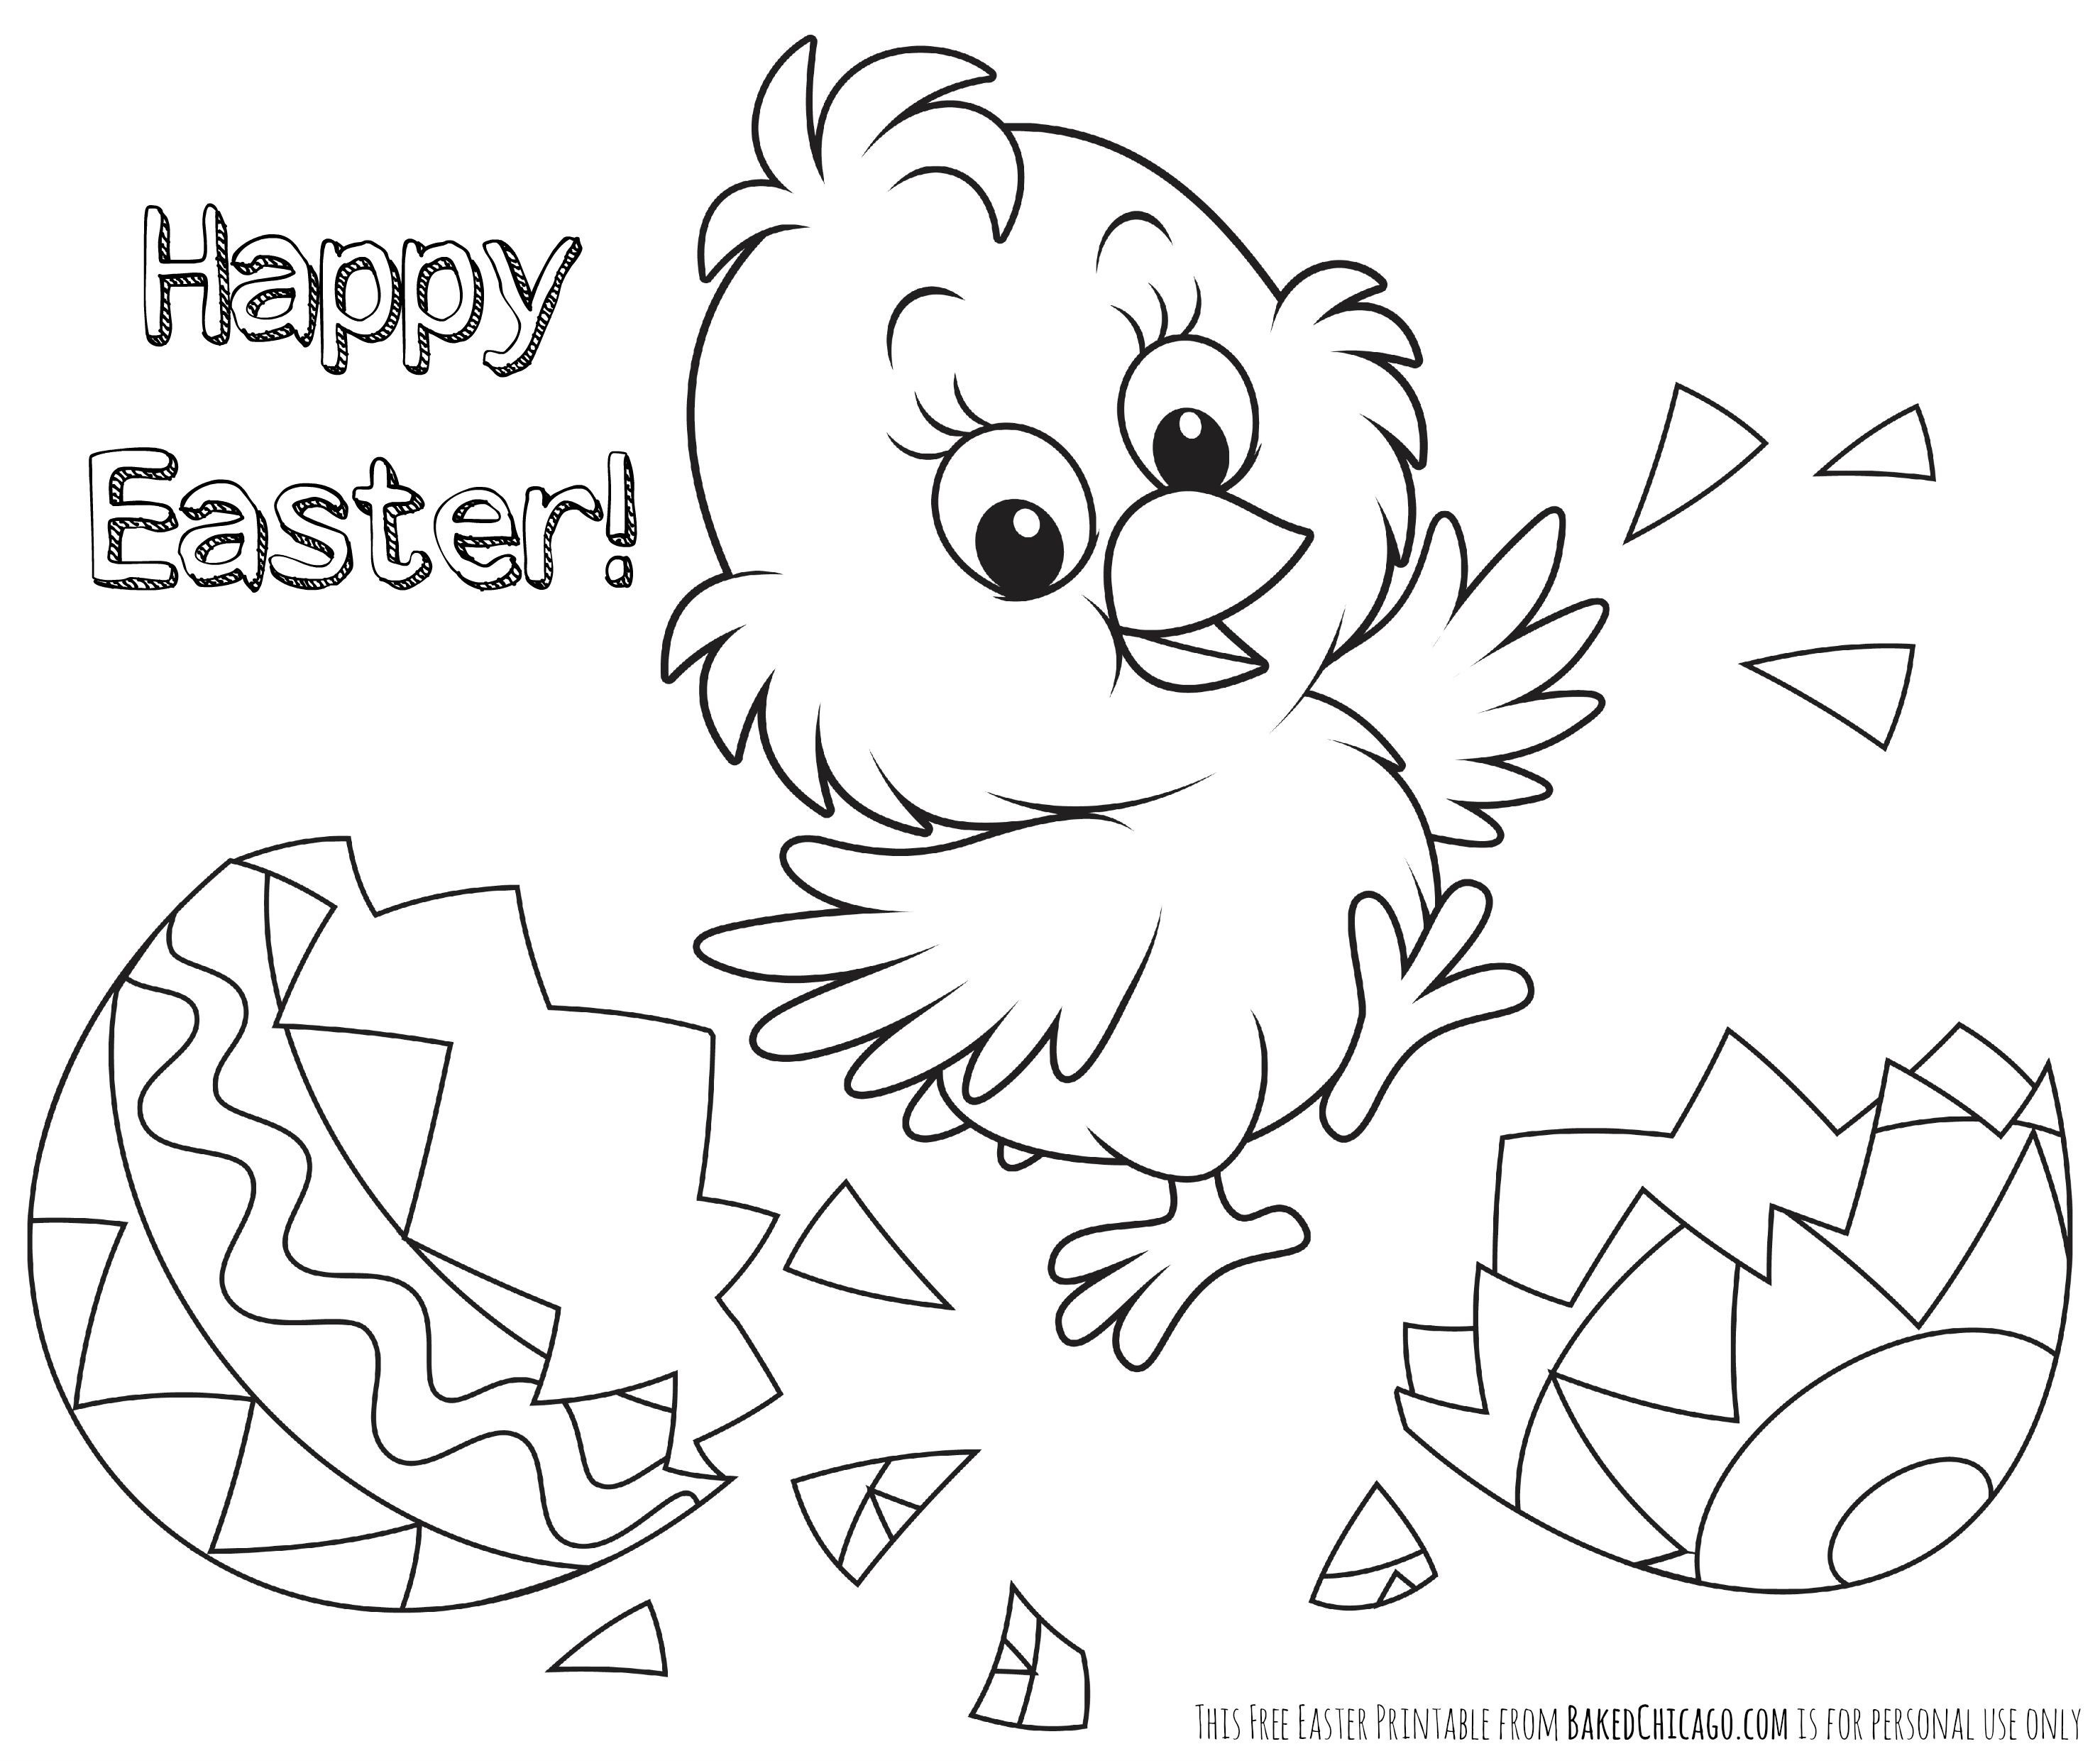 12 Free Printable Easter Coloring Pages | Topsailmultimedia - Coloring Pages Free Printable Easter